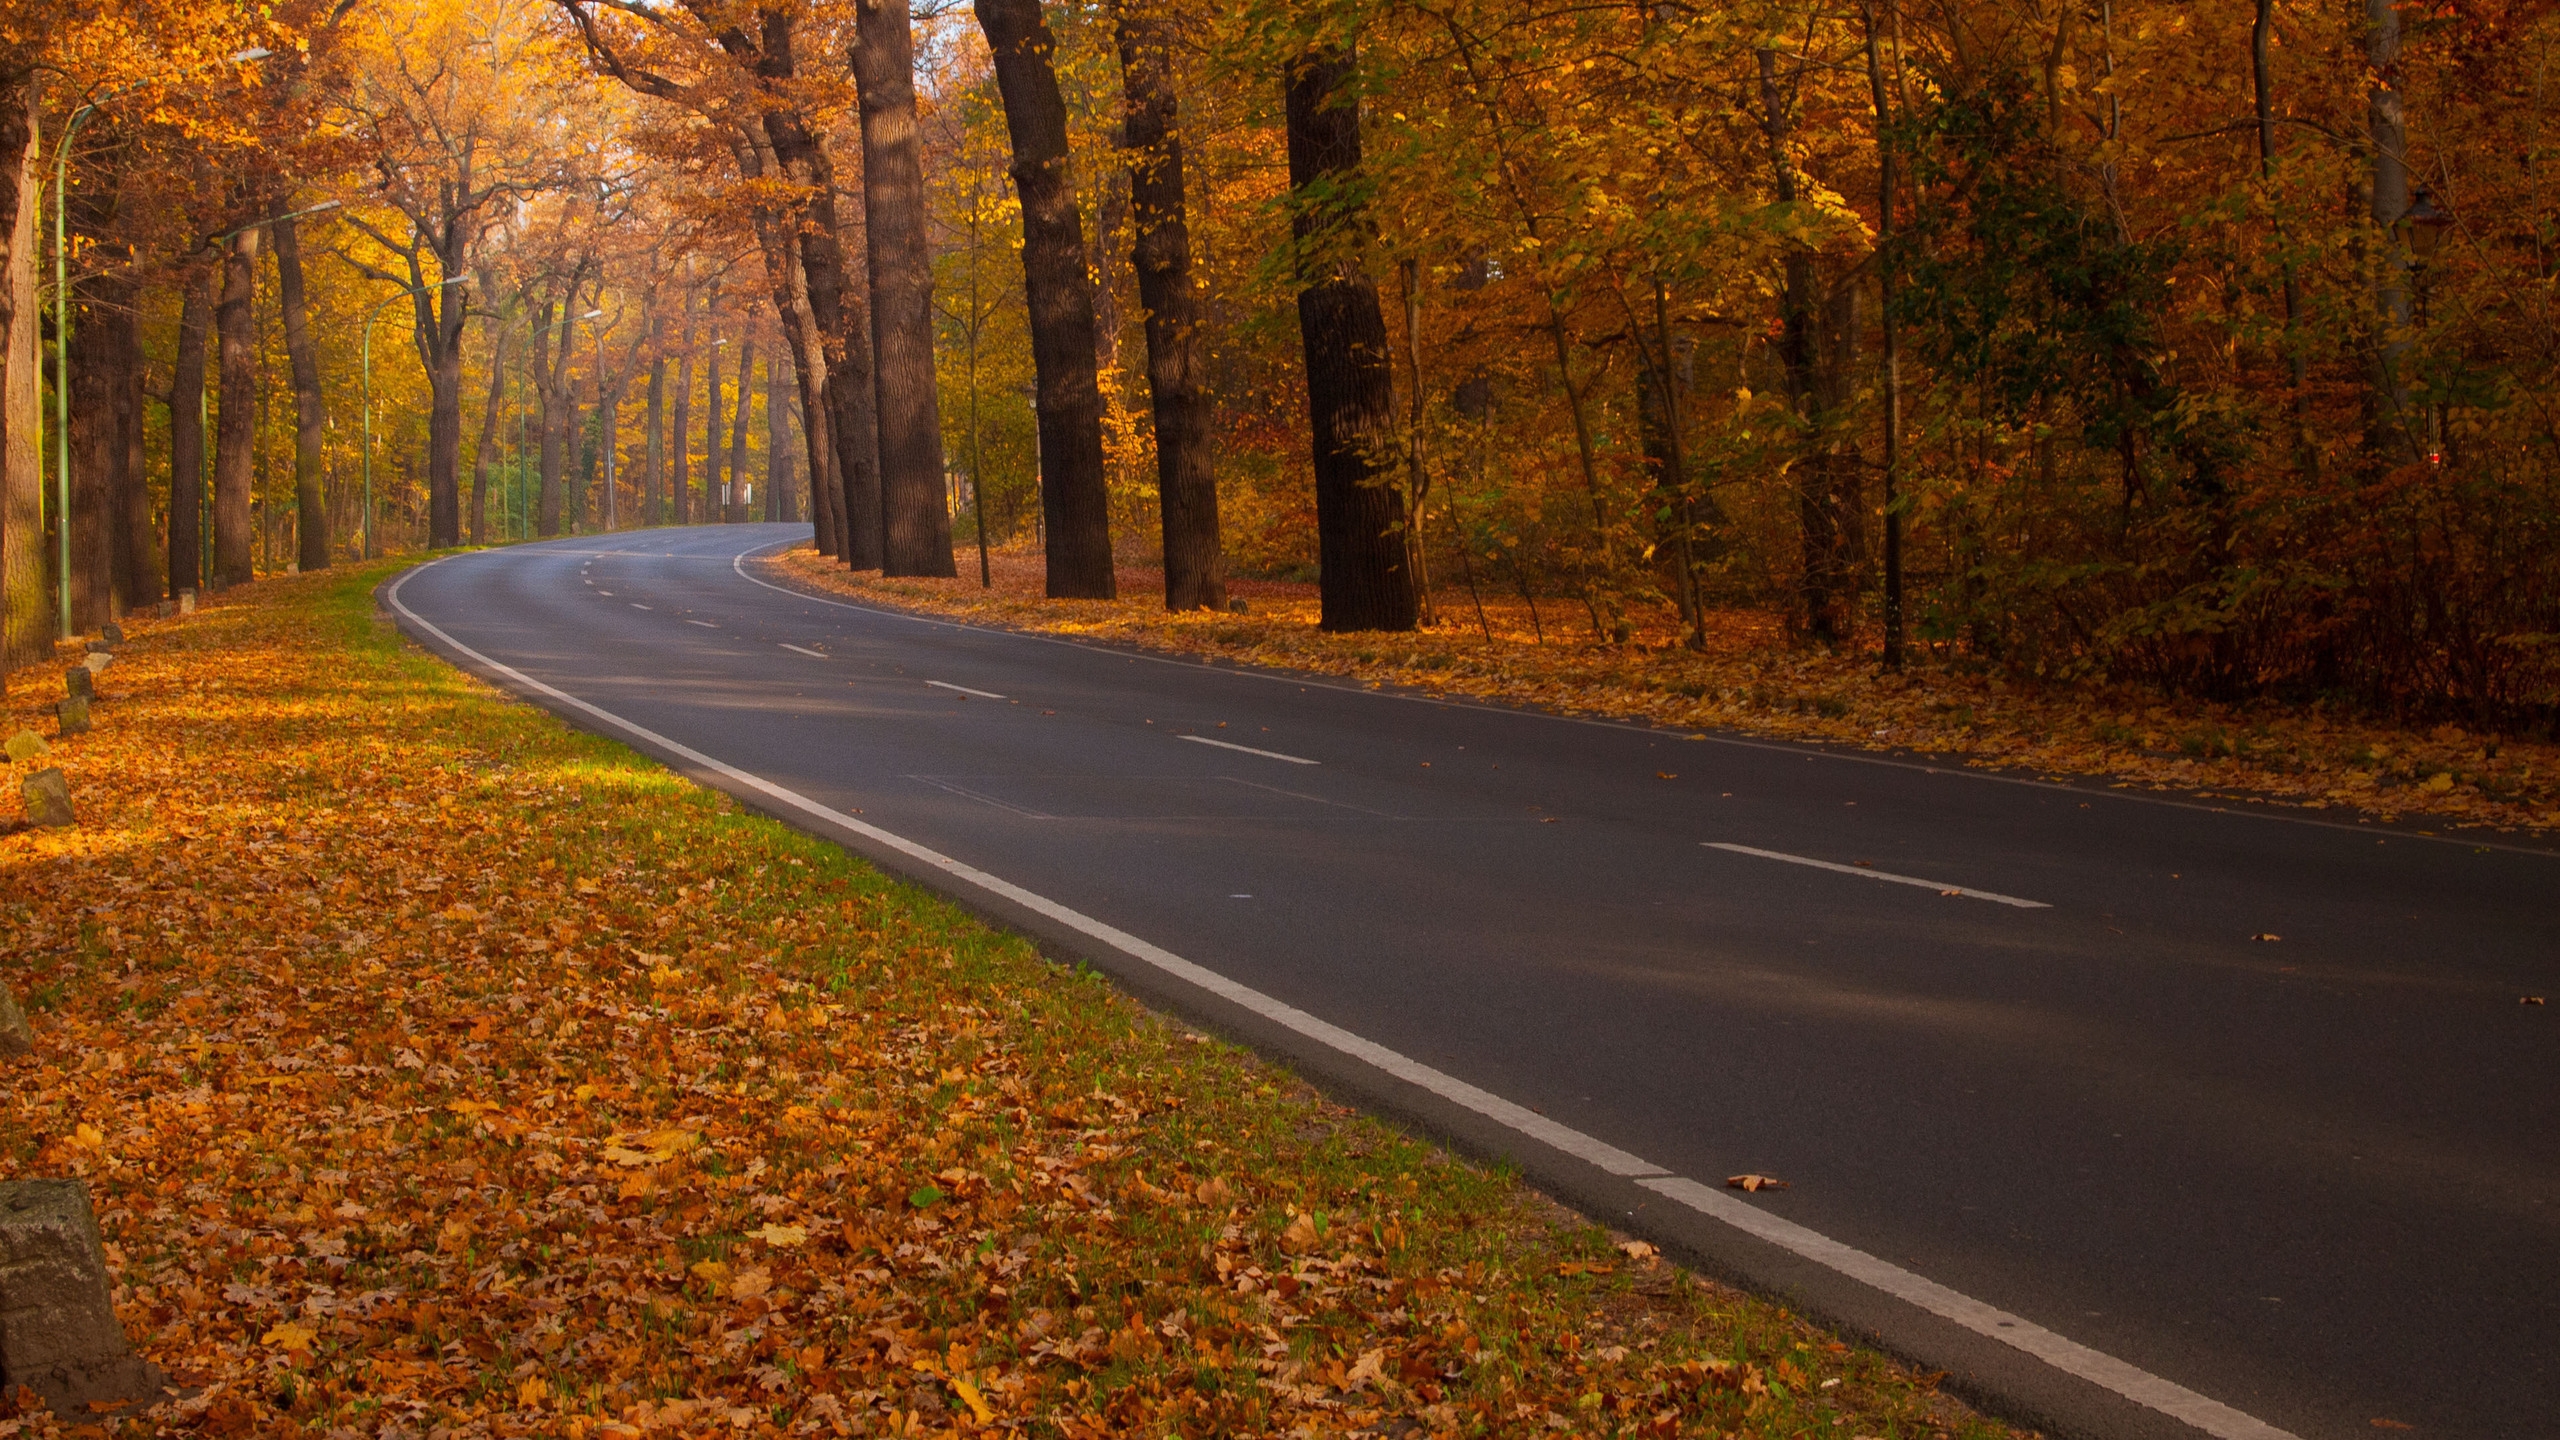 Road through Autumn Woods for 2560x1440 HDTV resolution